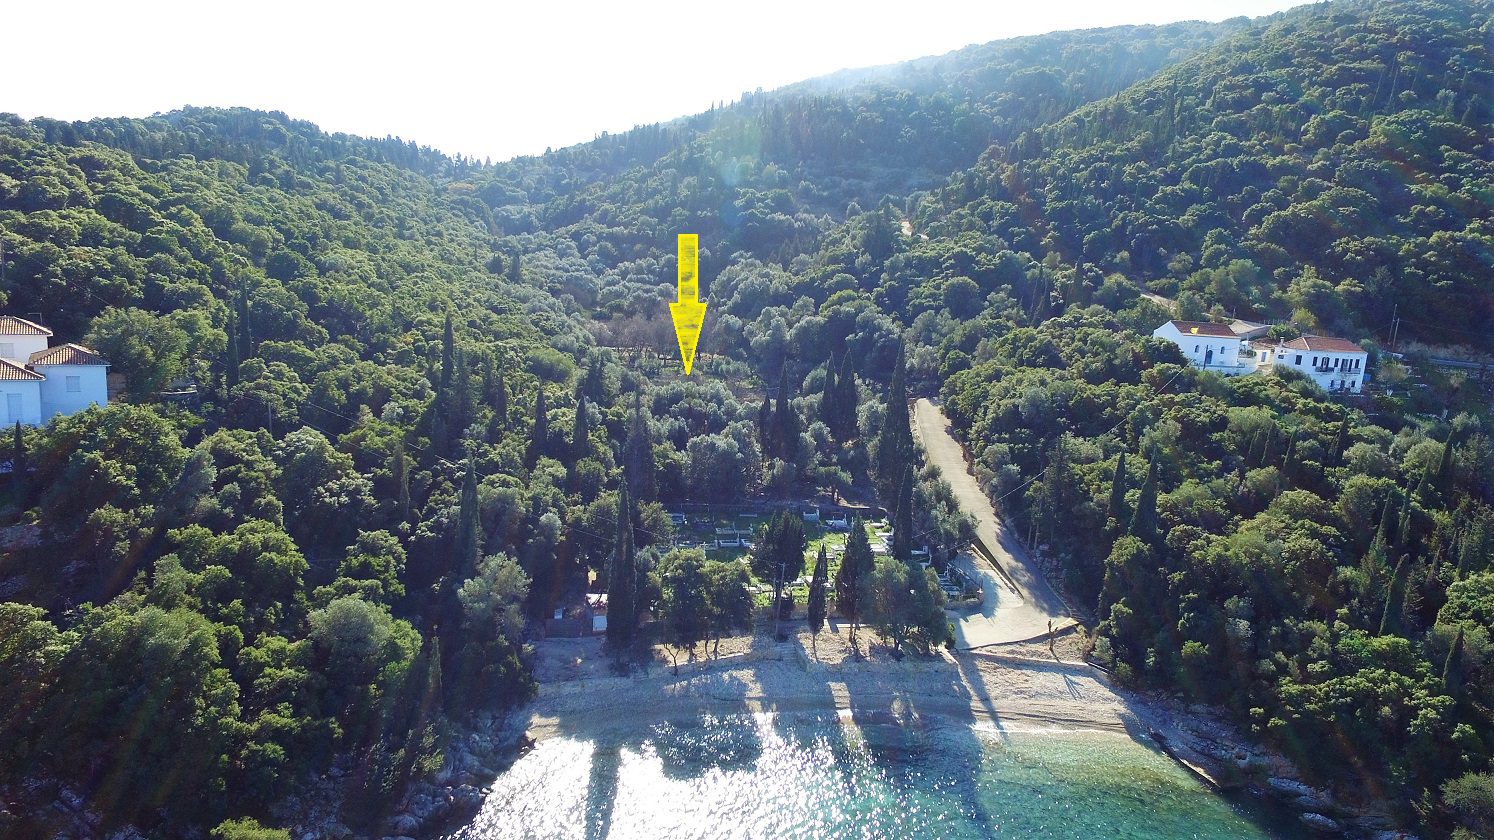 Aerial view of land for sale in Ithaca Greece, Kioni